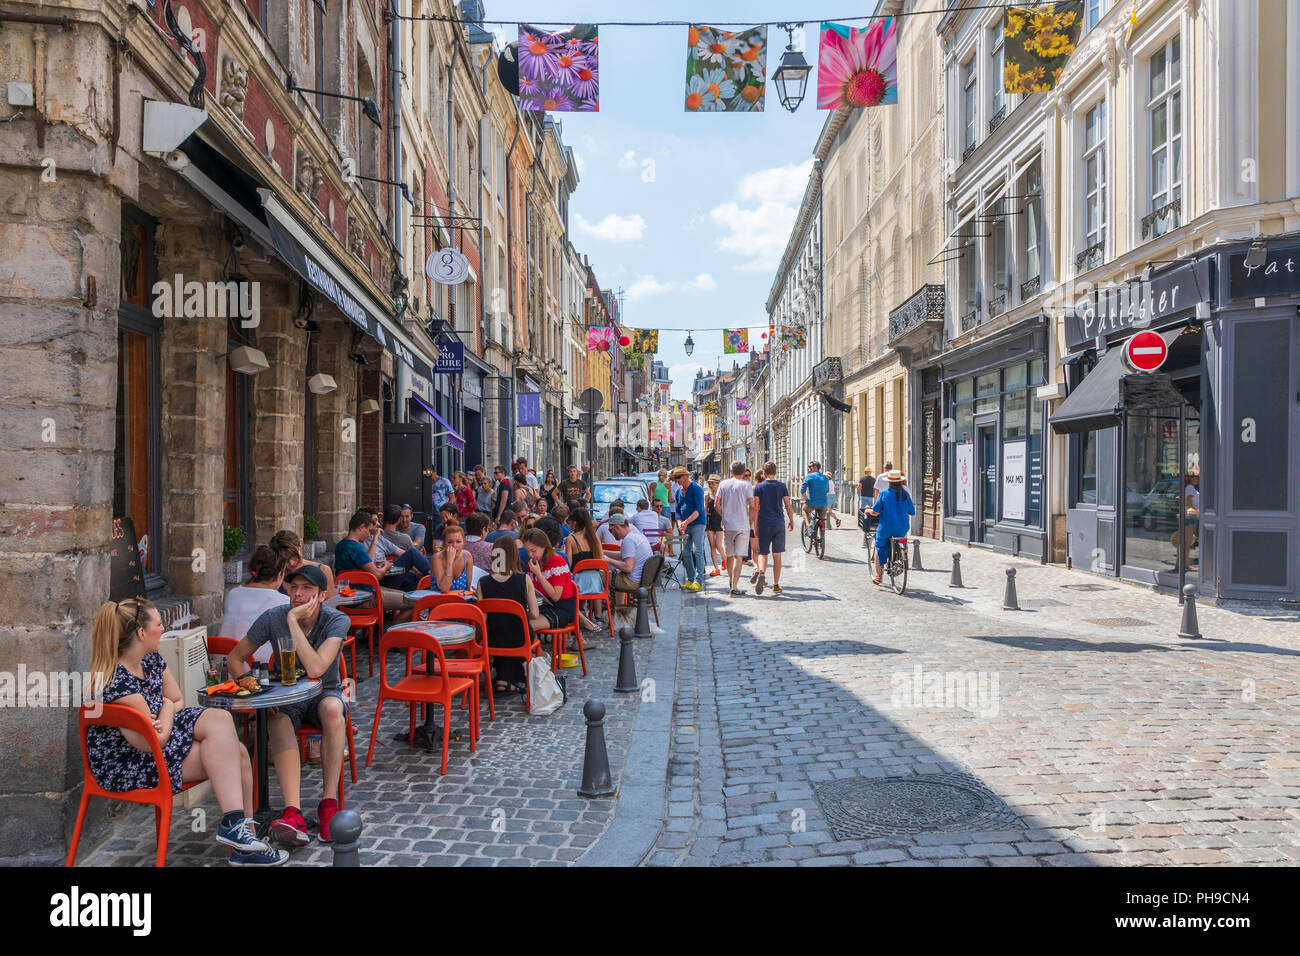 Back street cafes and bars, Lille, France Stock Photo